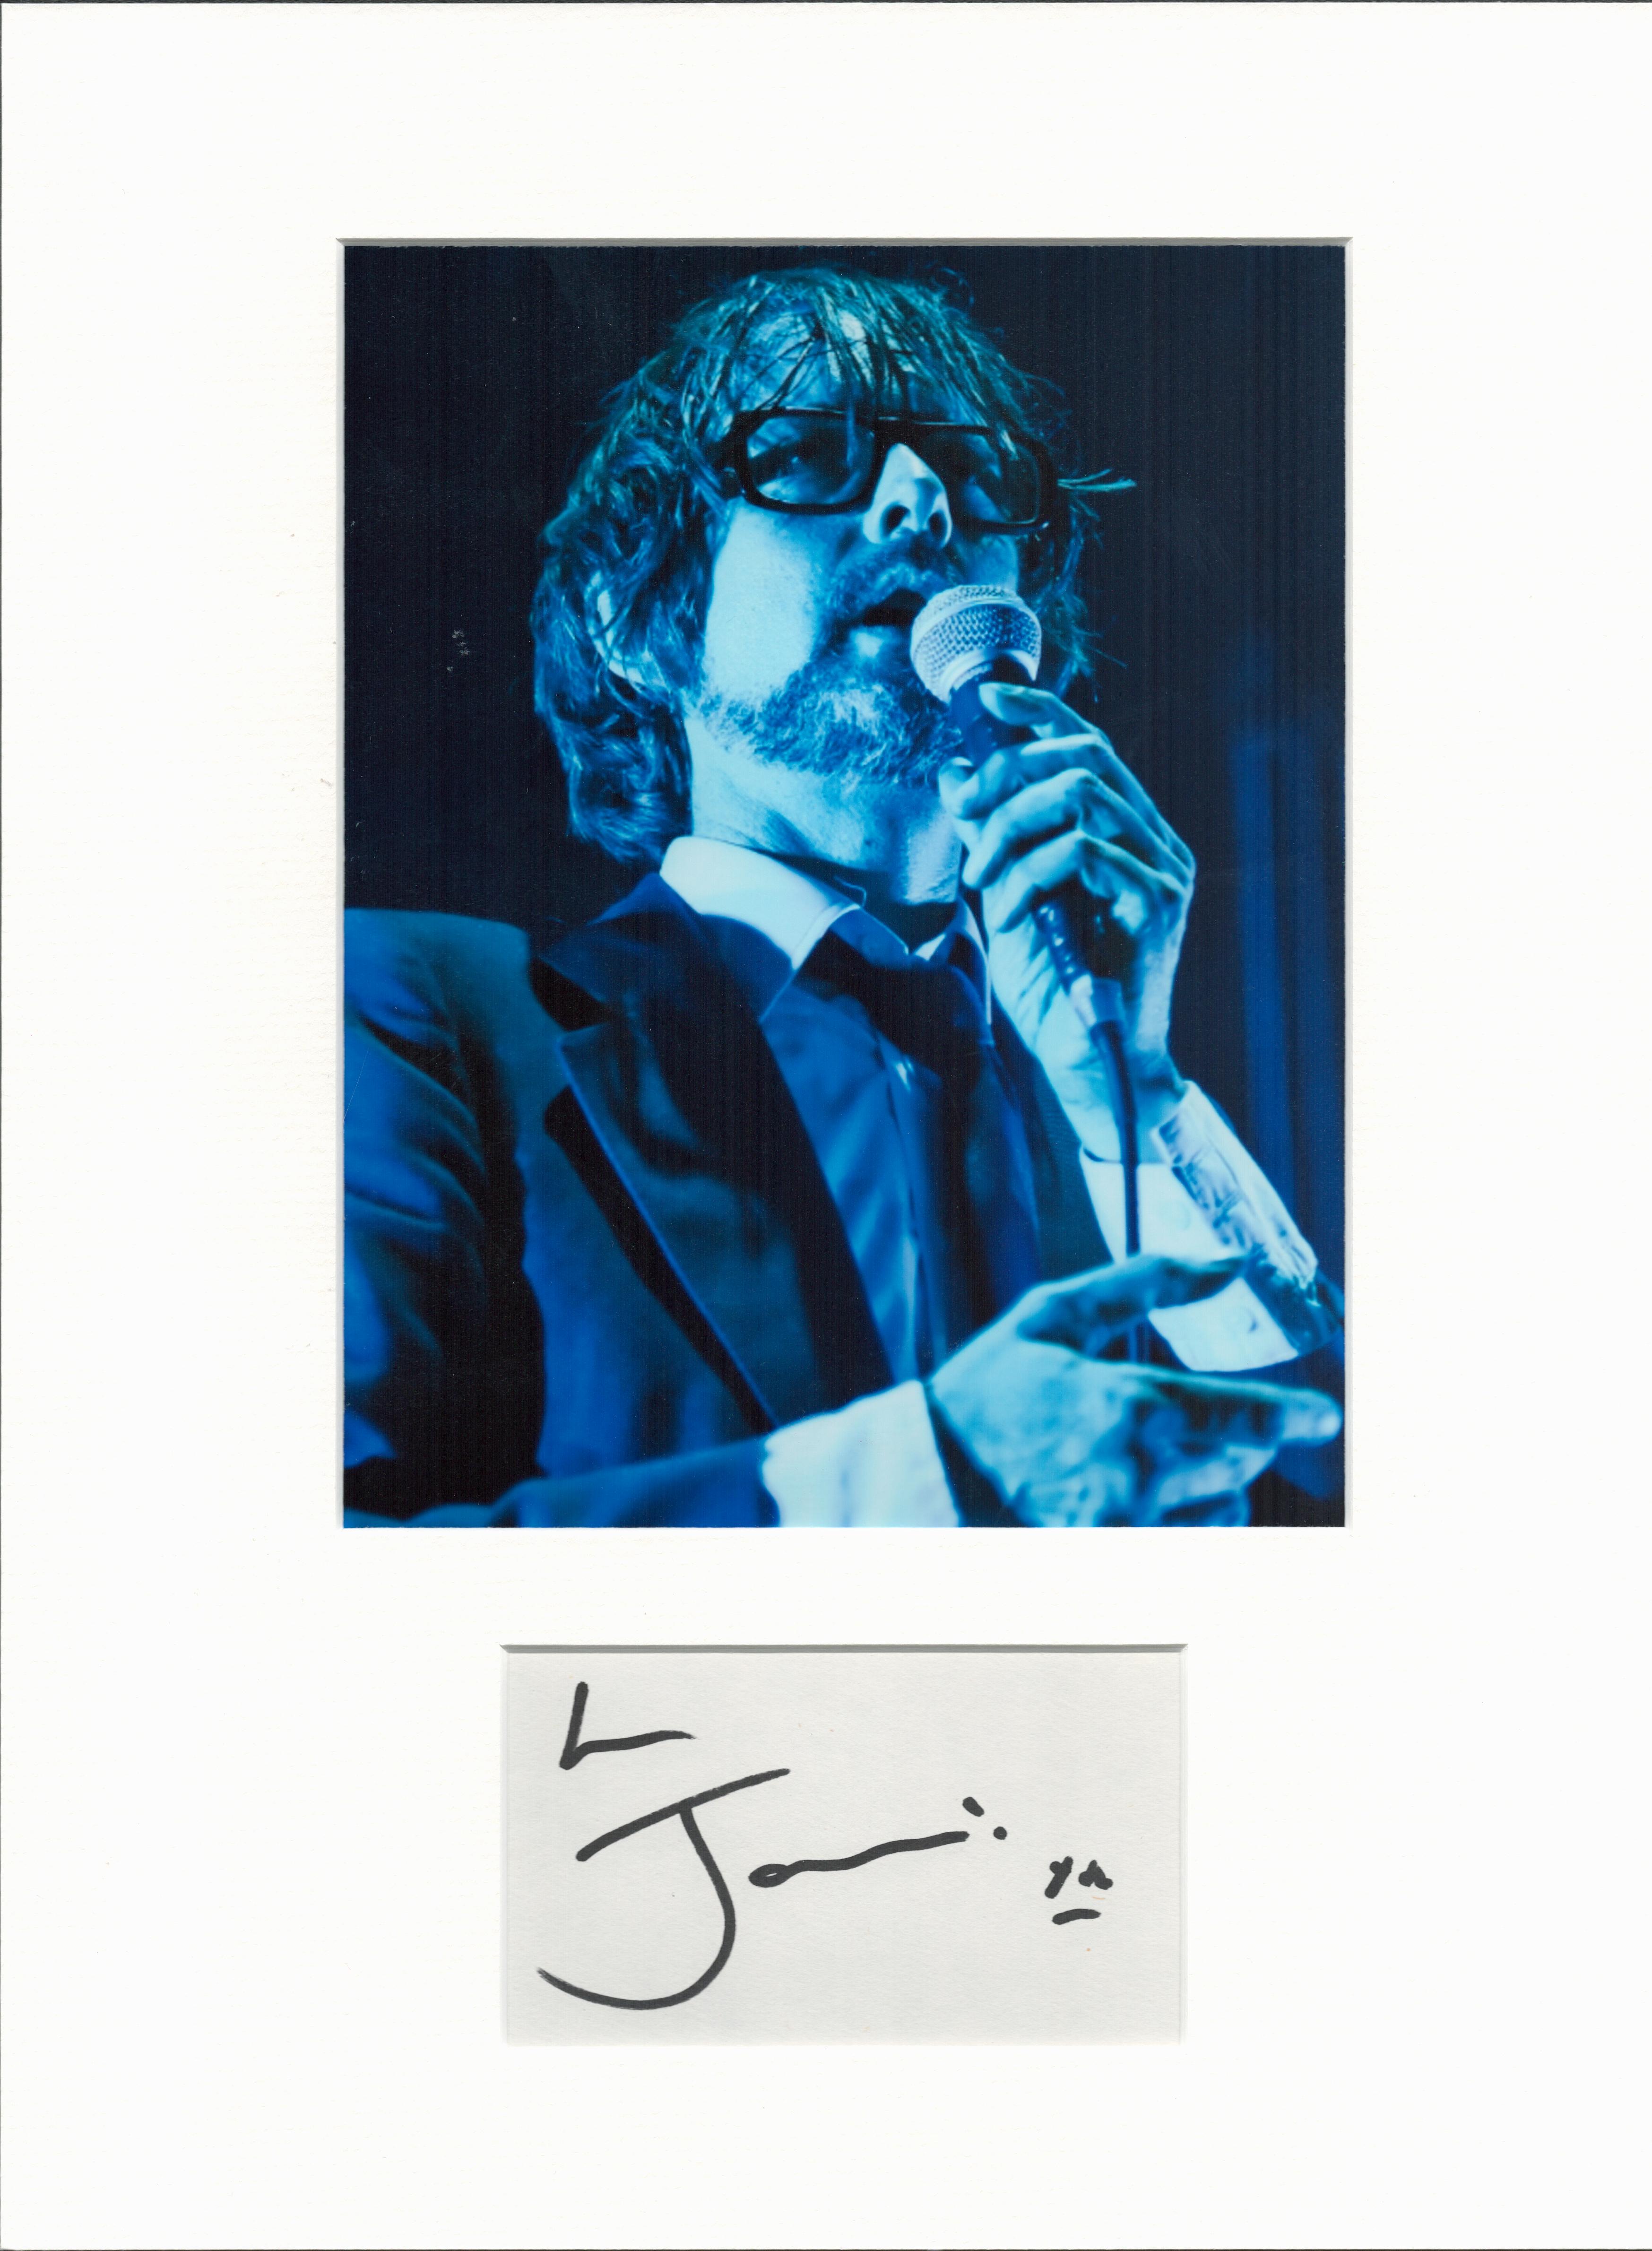 Jarvis Cocker signature piece in autograph presentation. Mounted with photograph to approx. 16 x